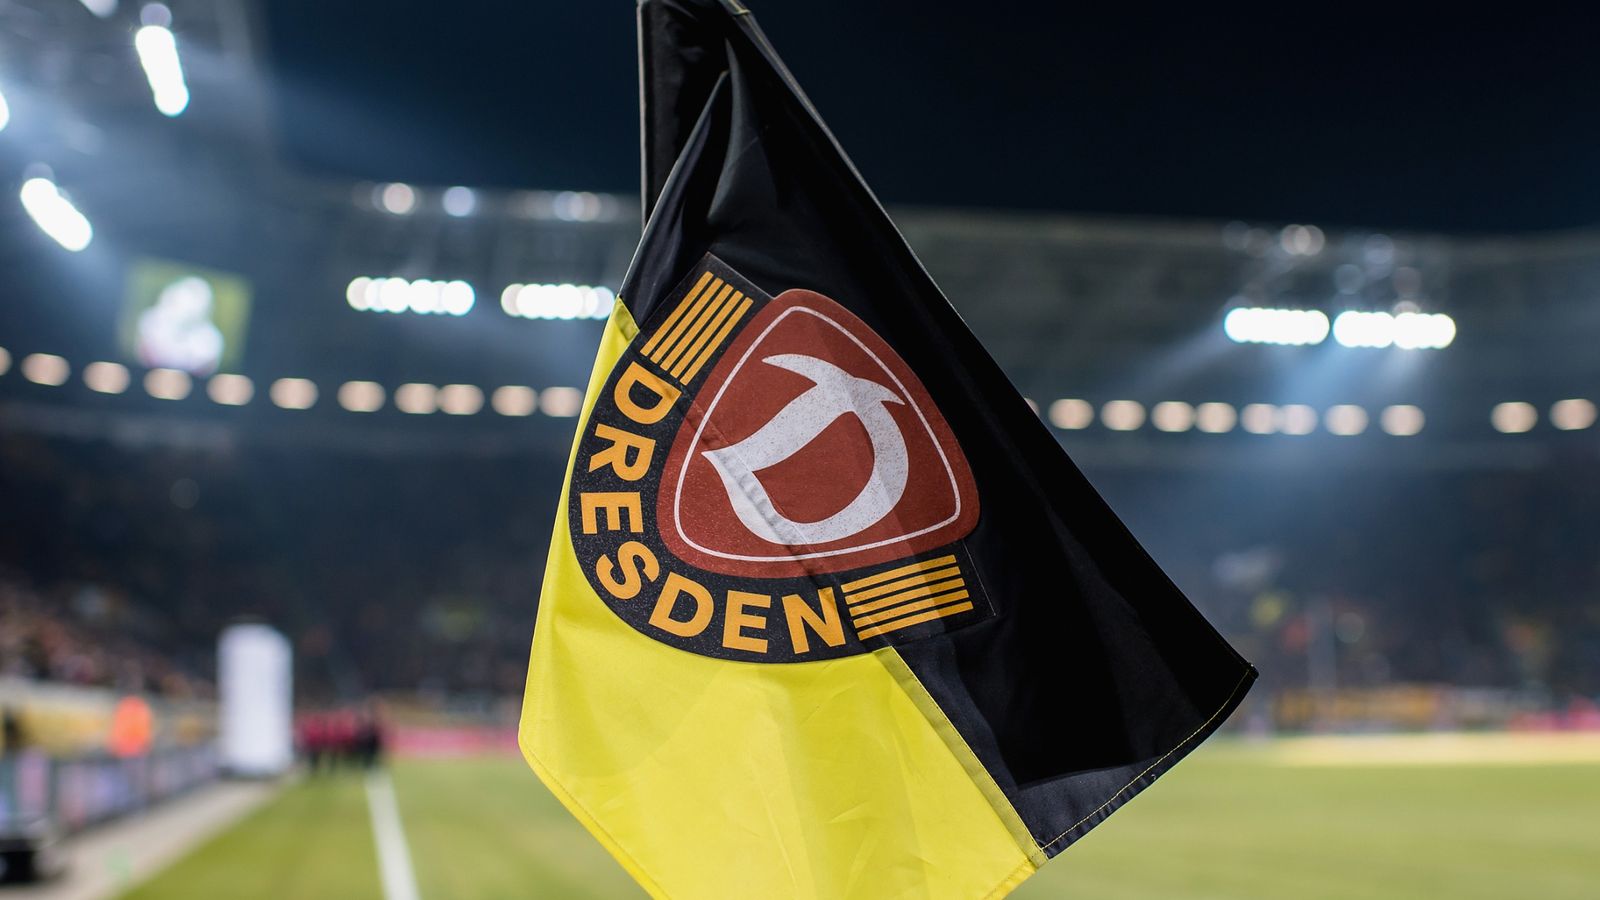 Dynamo Dresden: '58 affected – but they mean all of us' – DW – 10/29/2019